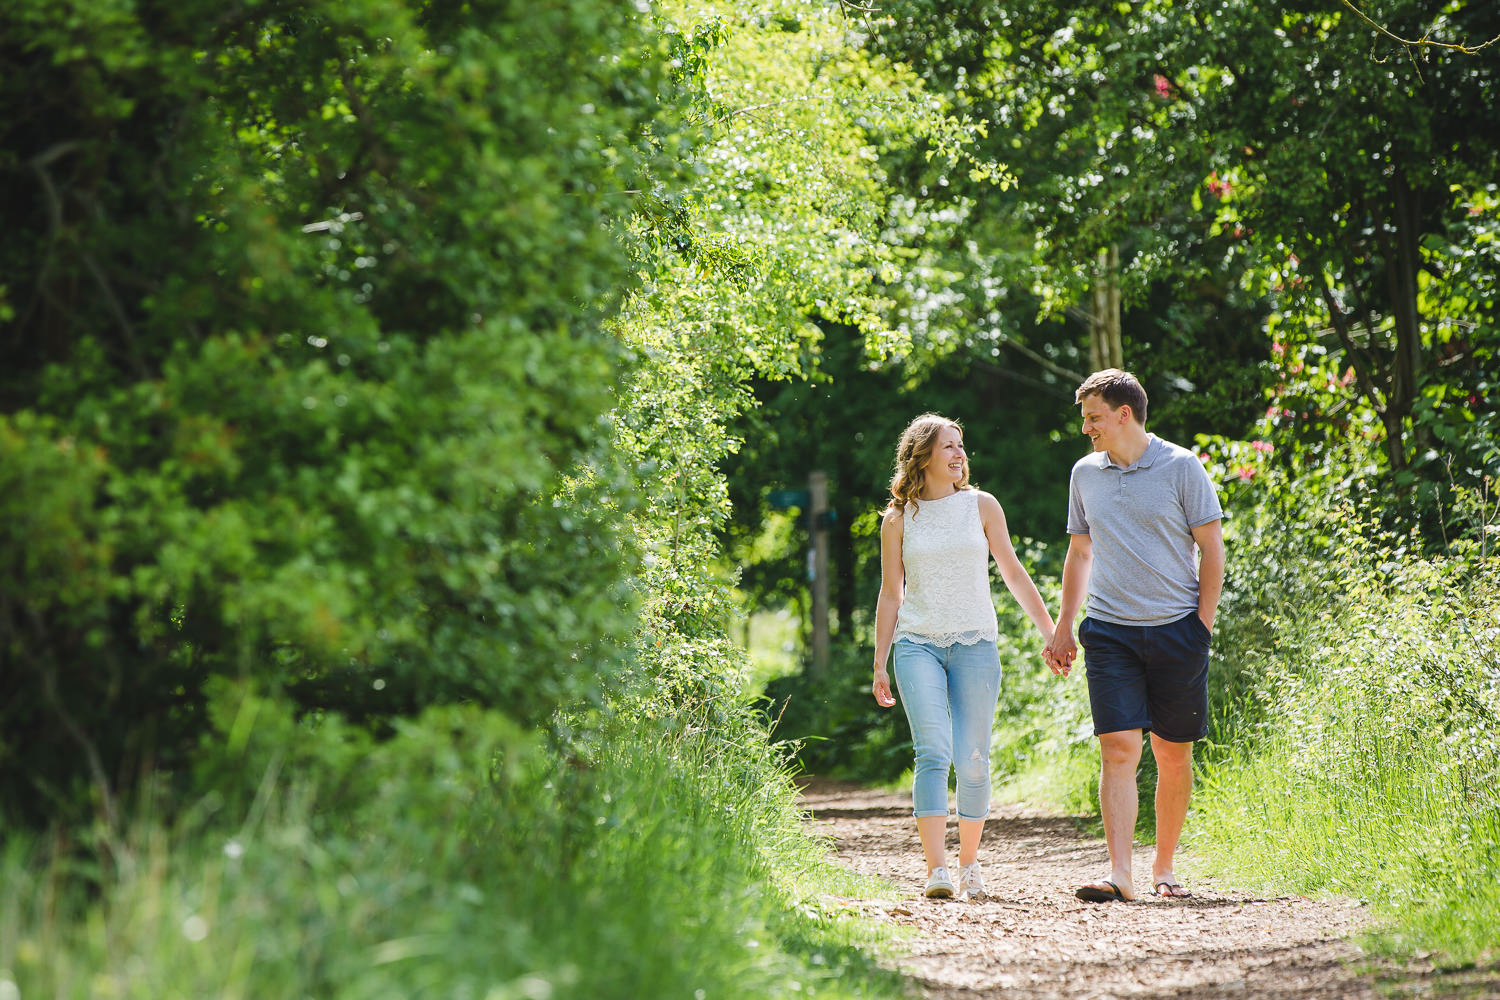 Engagement shoot photo captured by a Cambridge photographer, of an engaged couple walking along a woodland park in Summer.